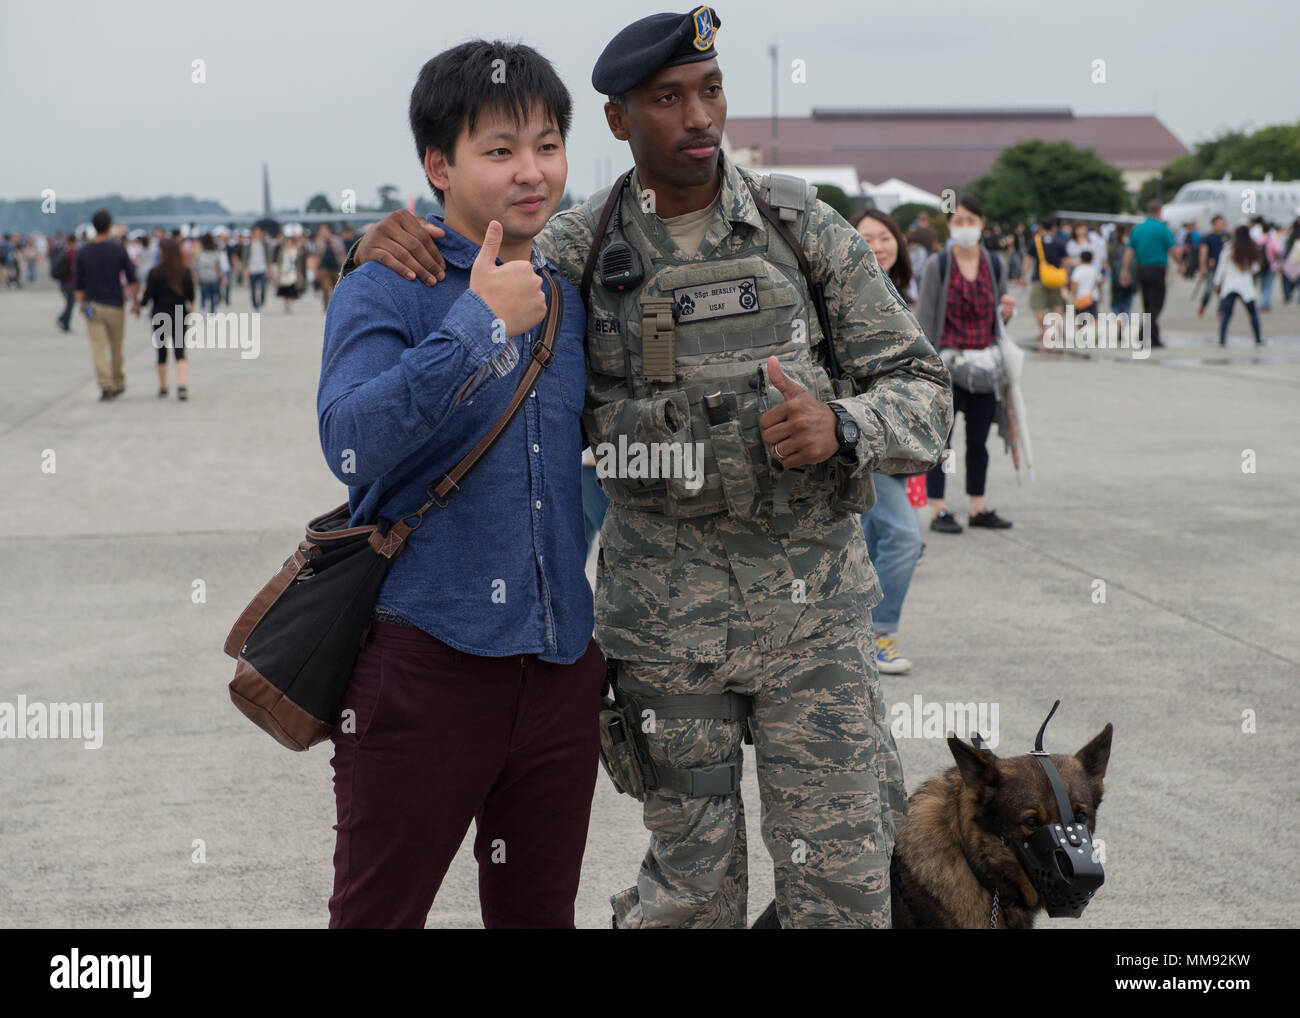 An Airman from the 374th Security Forces Squadron poses with a visitor of  the 2017 Japanese-American Friendship Festival, Sept. 16, 2017 at Yokota  Air Base, Japan. The festival is designed to bolster